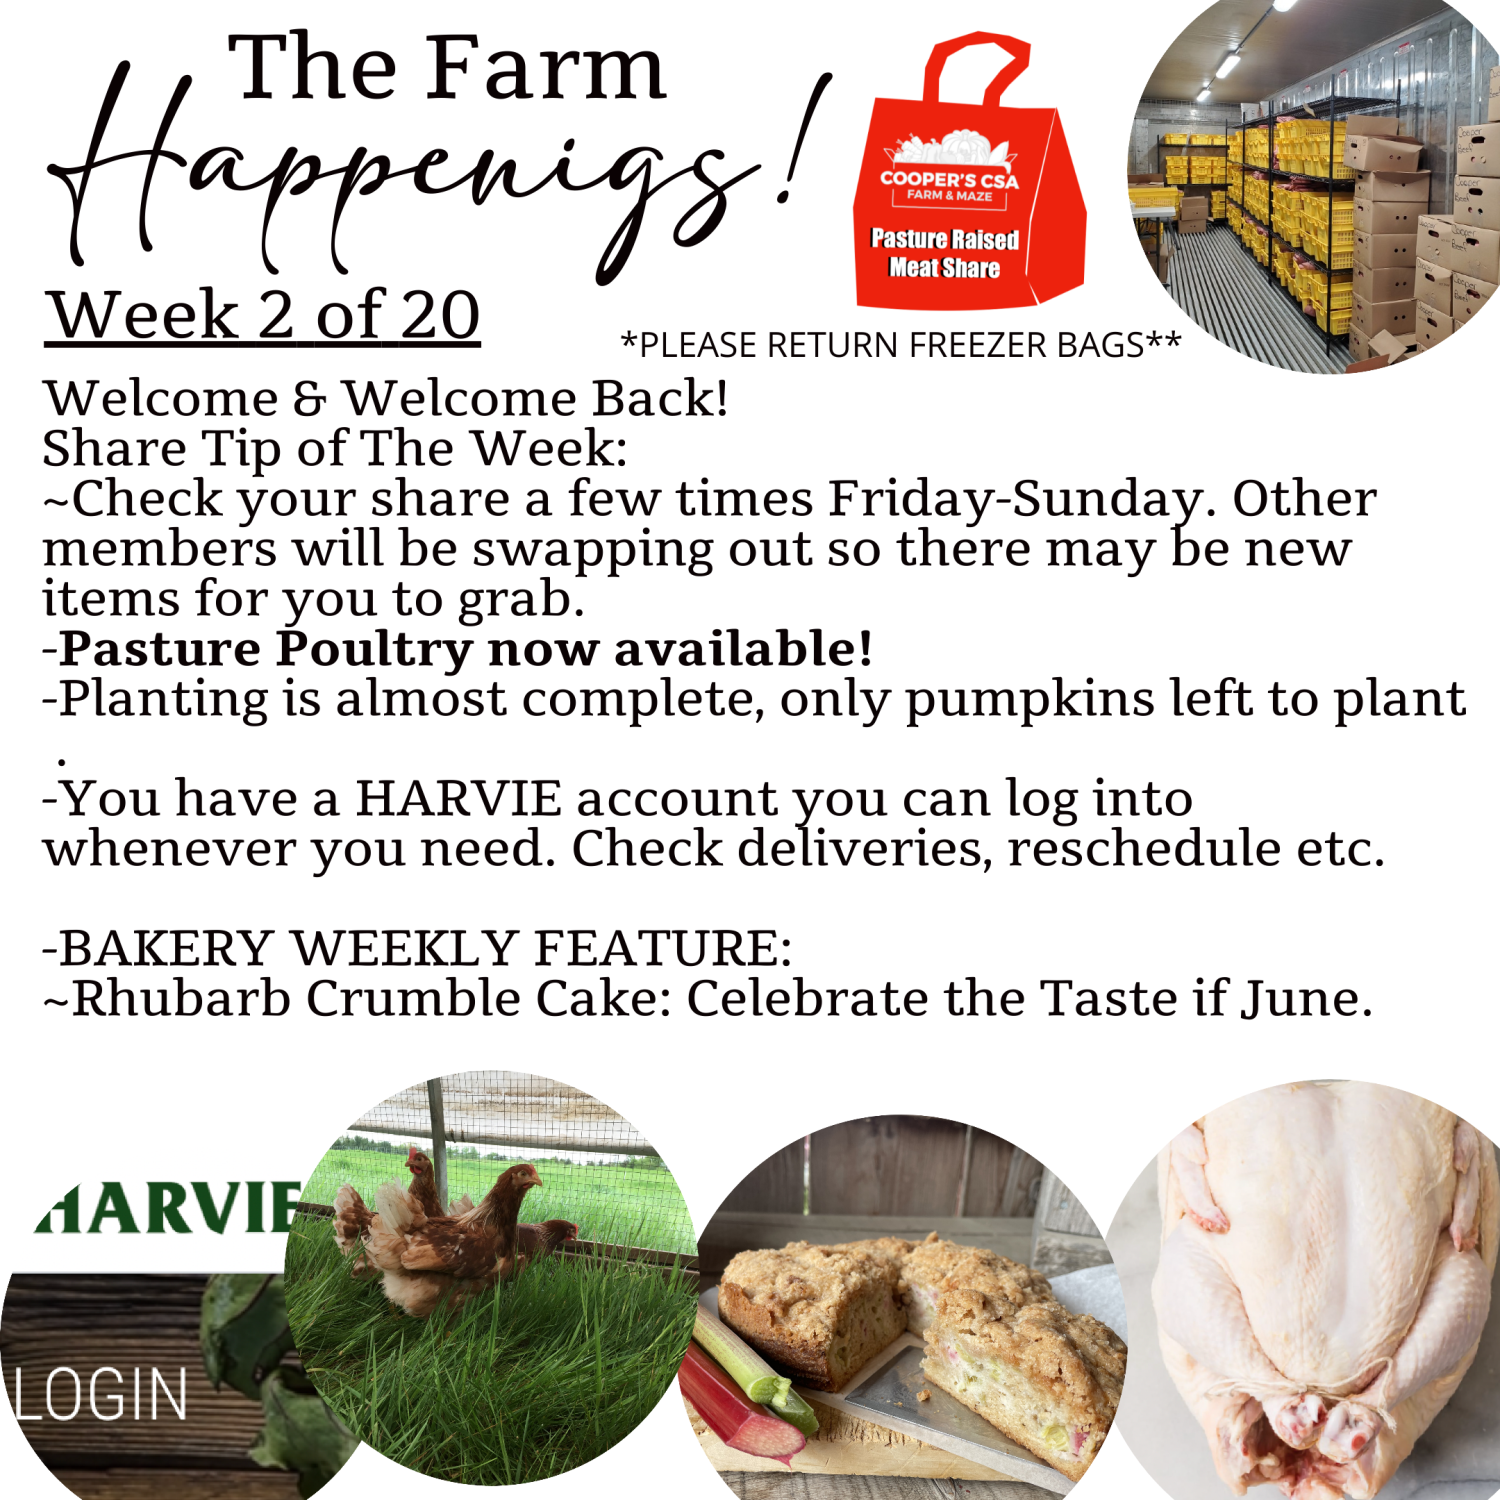 Previous Happening: "Pasture Meat Shares"-Coopers CSA Farm Farm Happenings Week 2